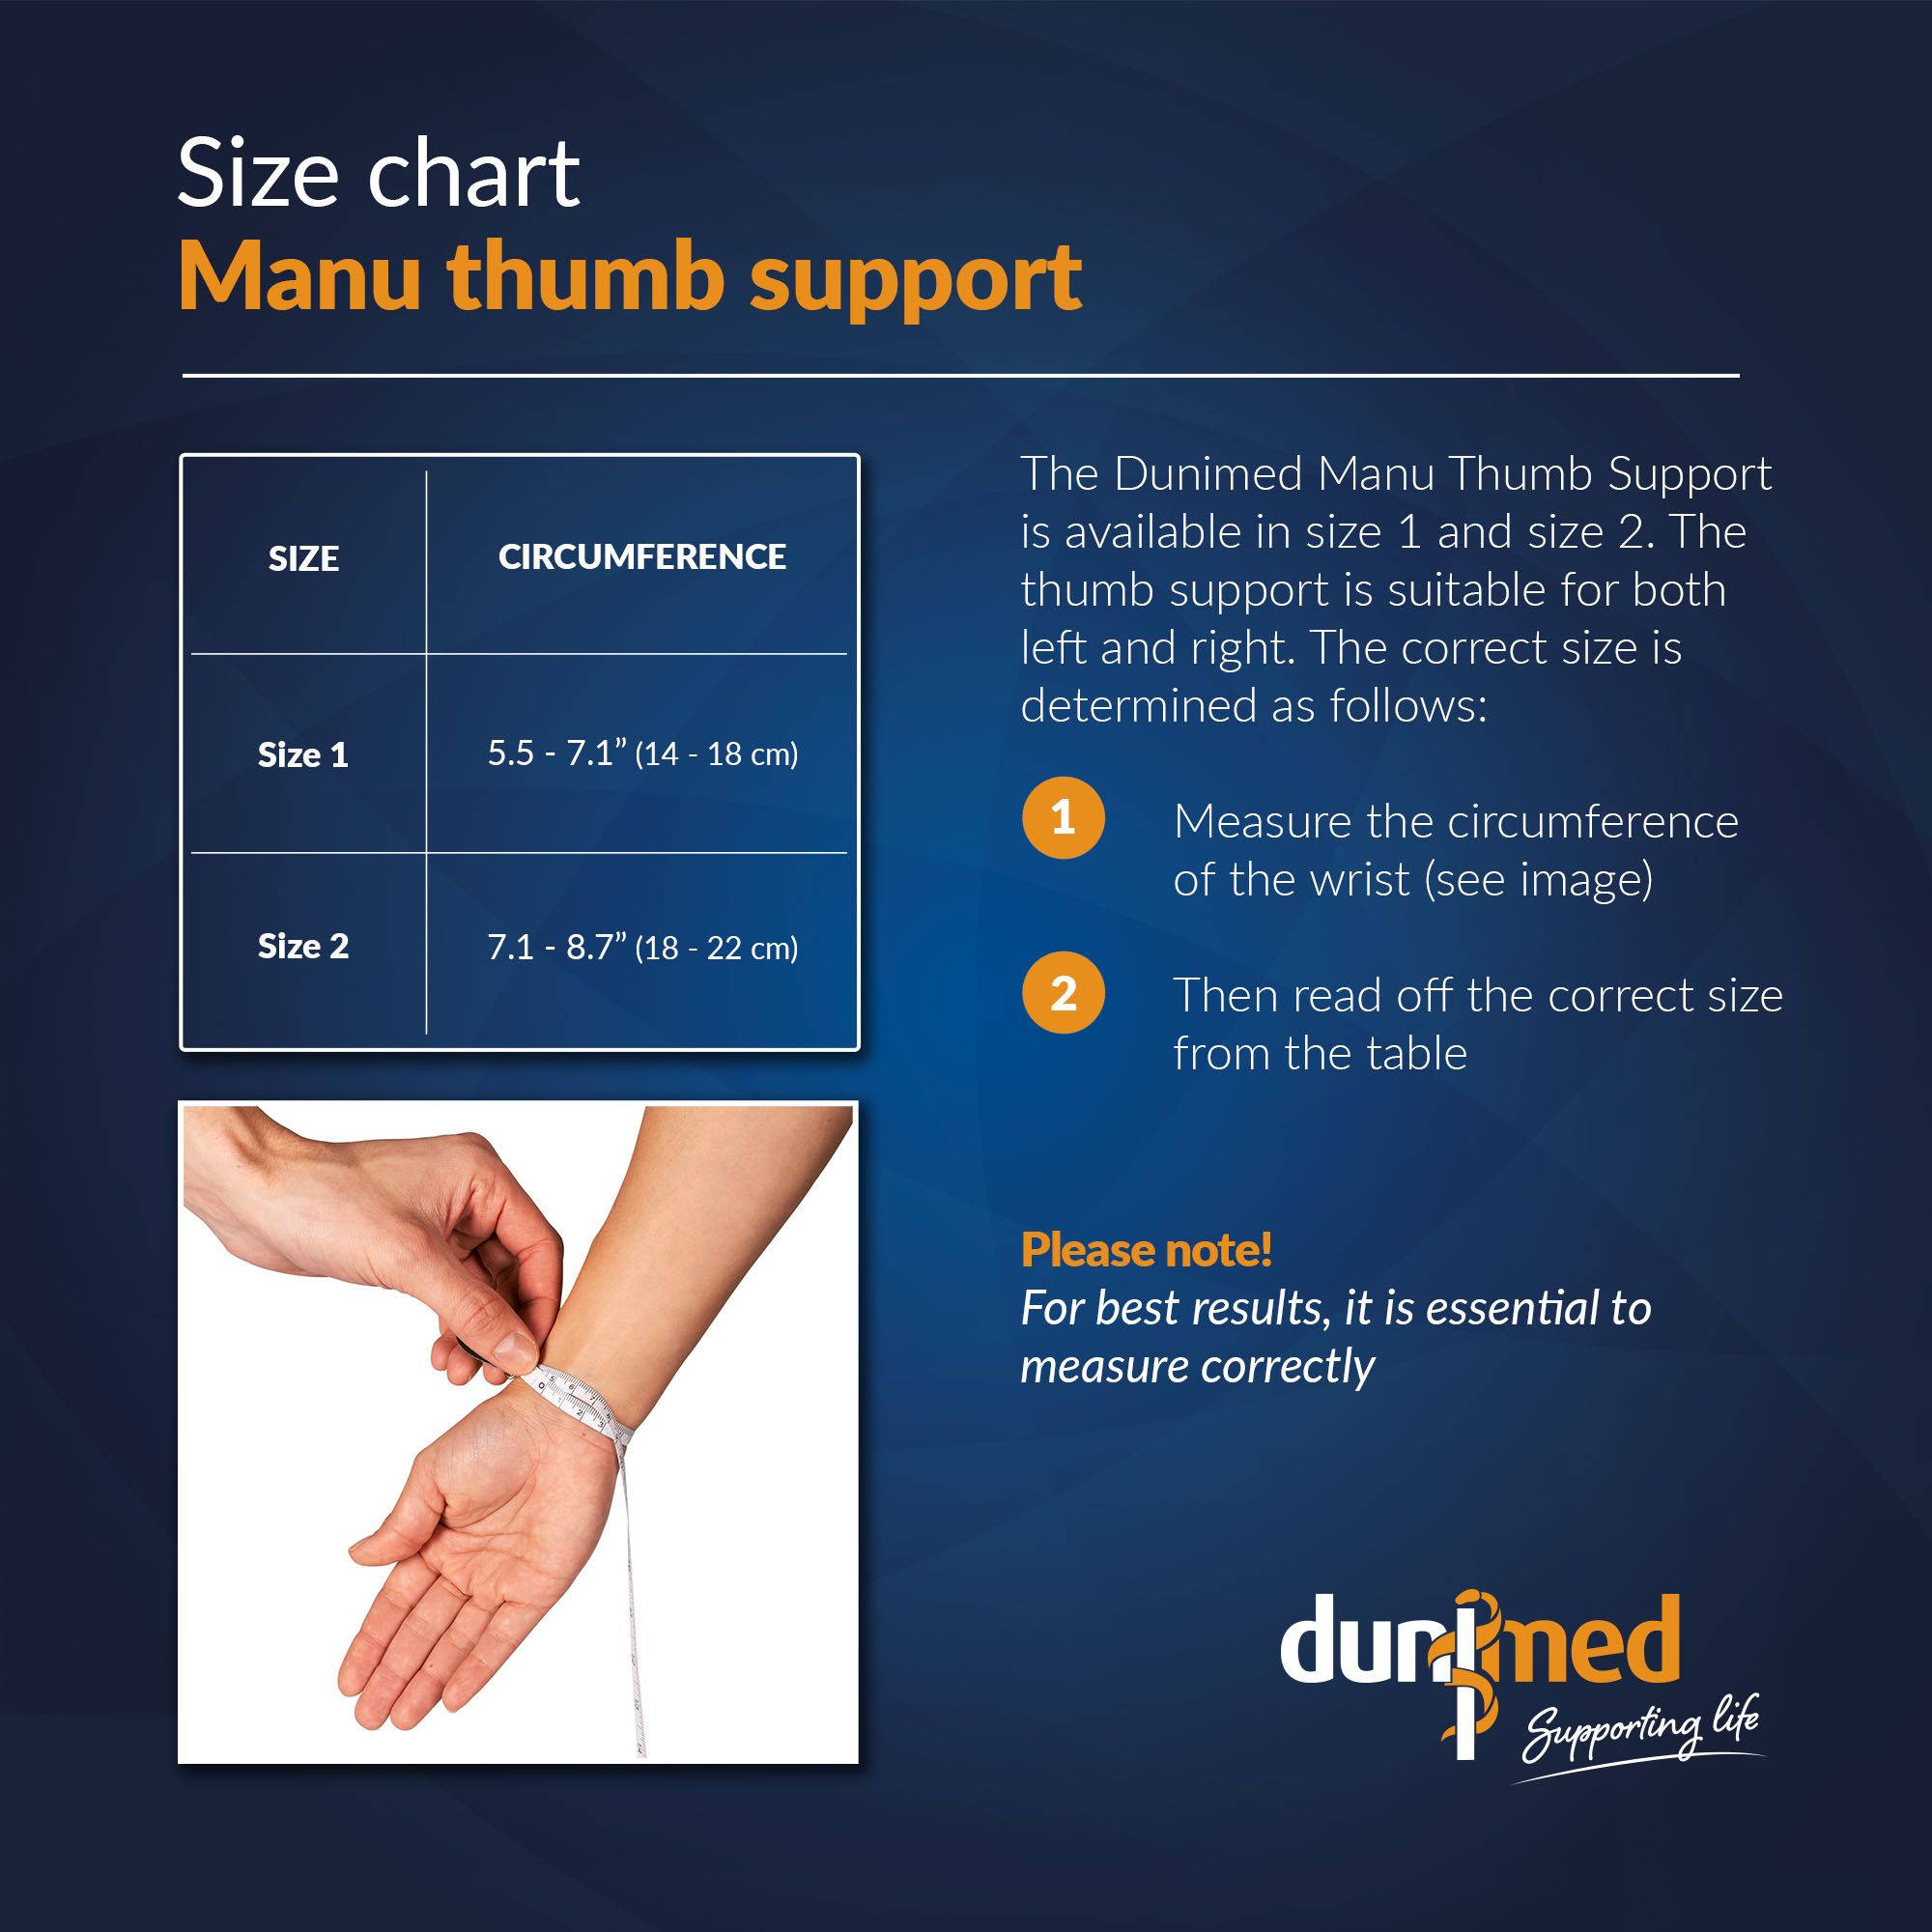 Size chart Dunimed Manu Thumb Support